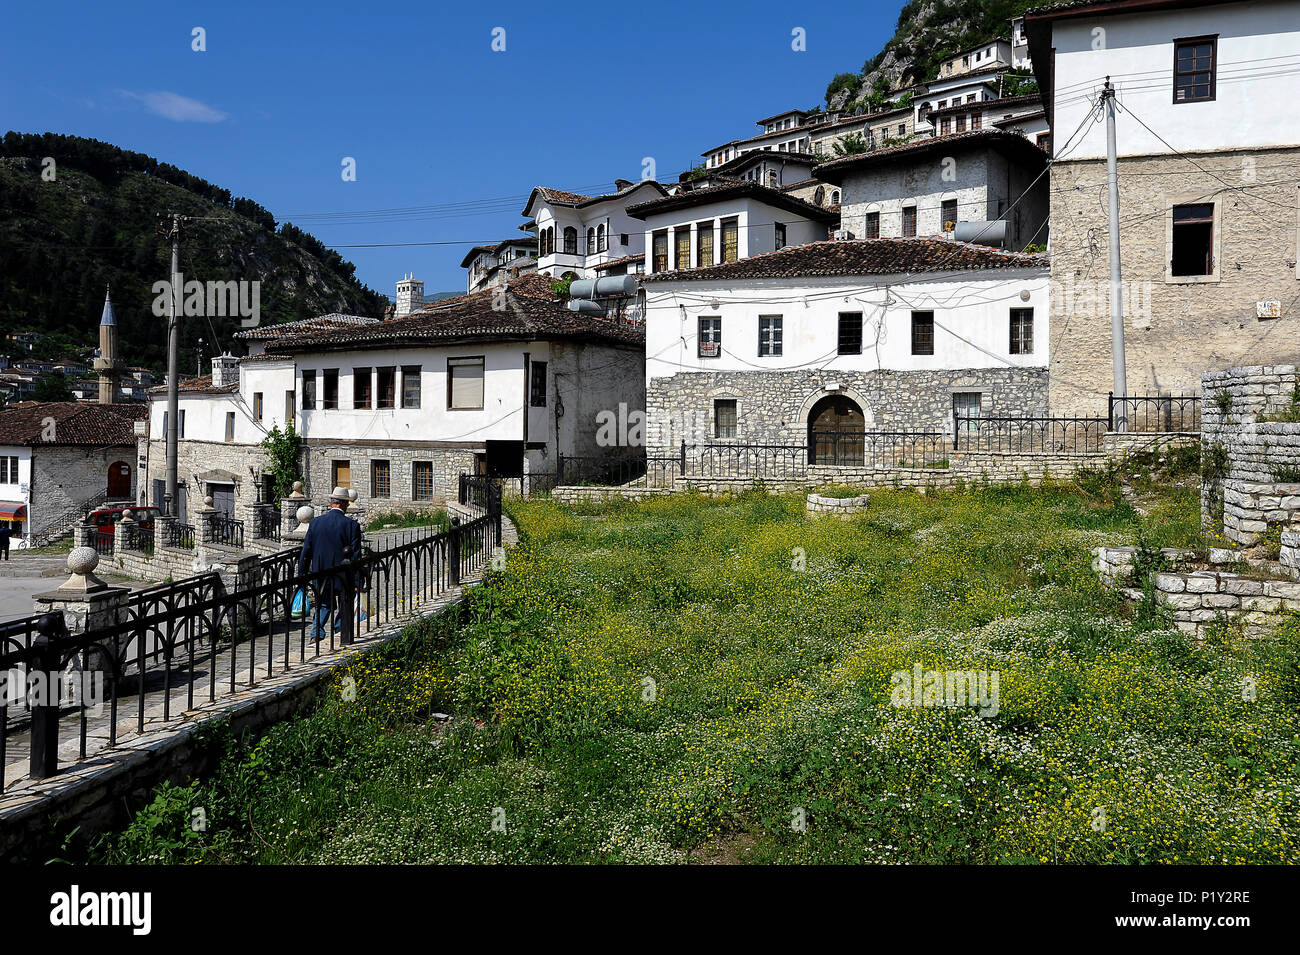 Berat, Albania, view of the houses of the city Stock Photo